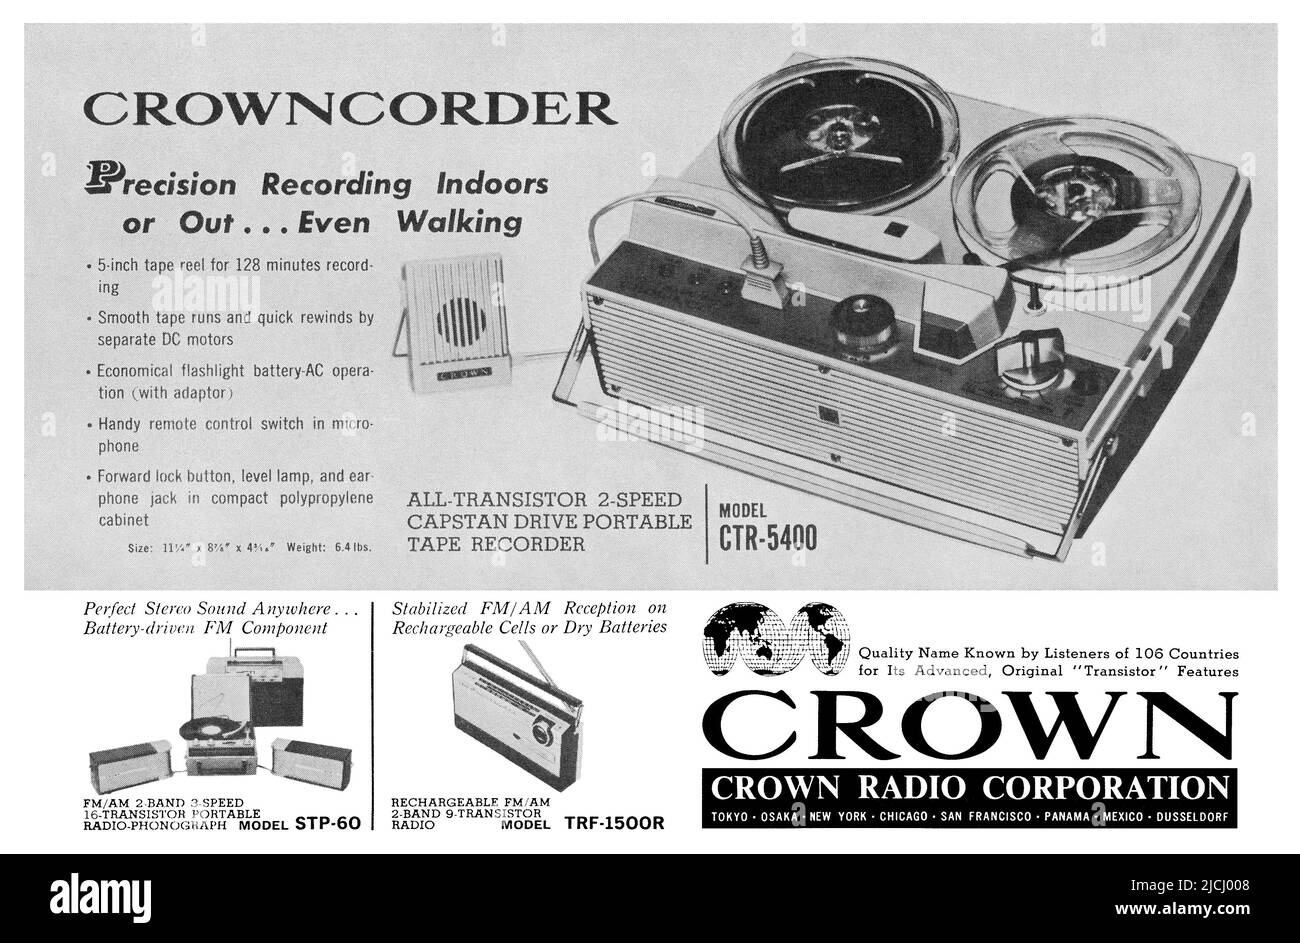 1964 U.S. advertisement for a Crown Radio Corporation Crowncorder reel-to-reel tape recorder. Stock Photo